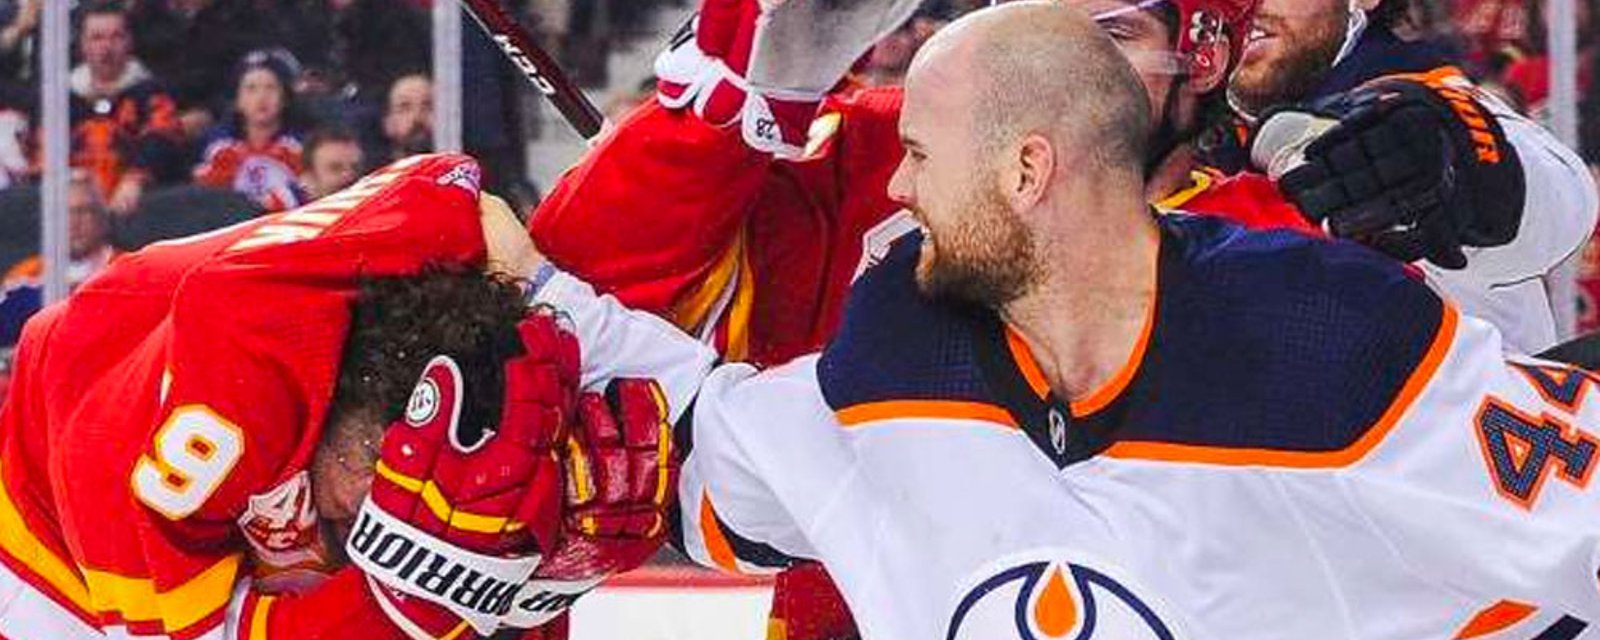 NHL pick special referees for game between Oilers and Flames 